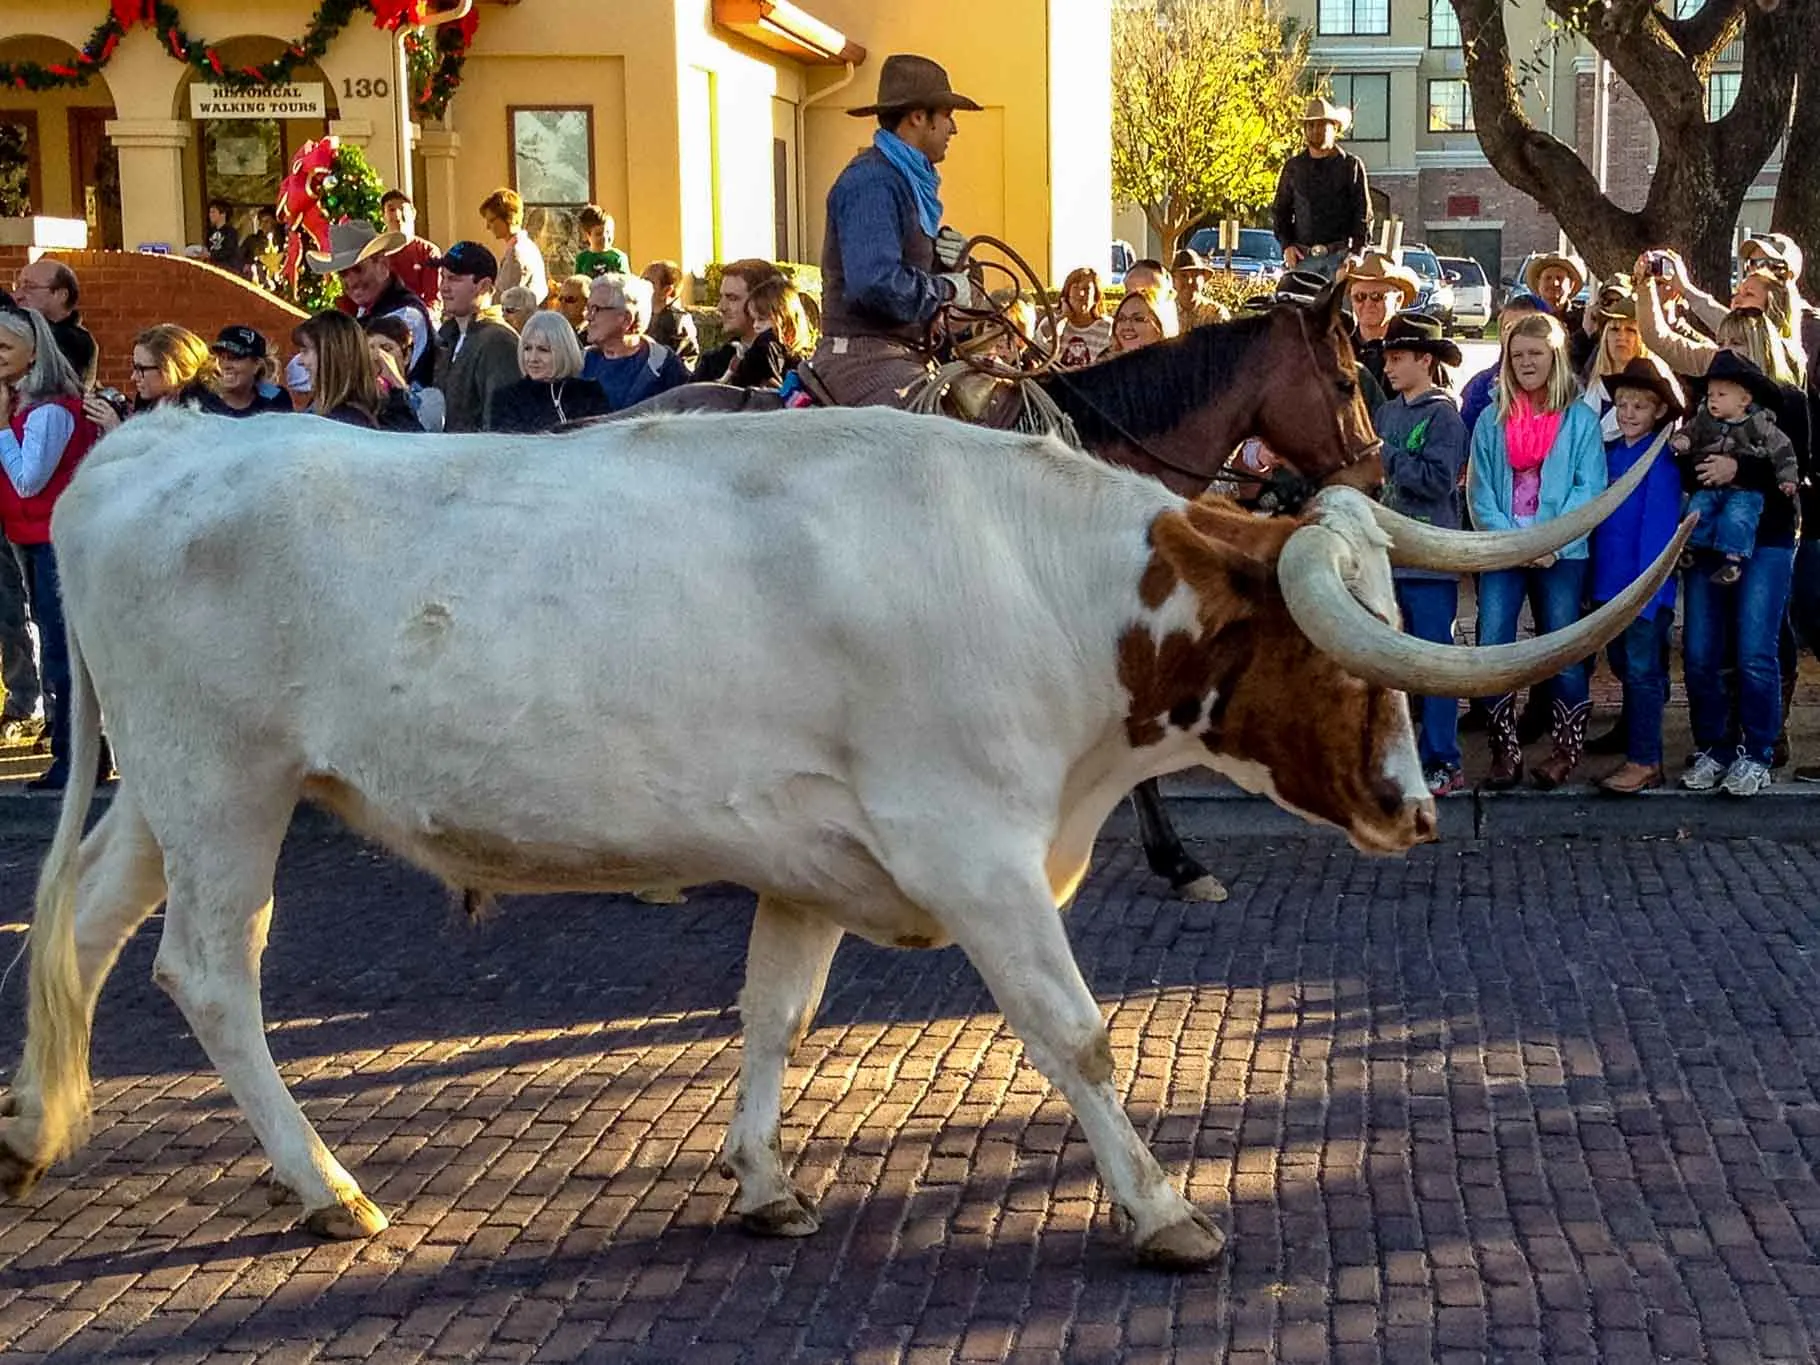 Longhorn cattle walking in the street with crowd looking on.